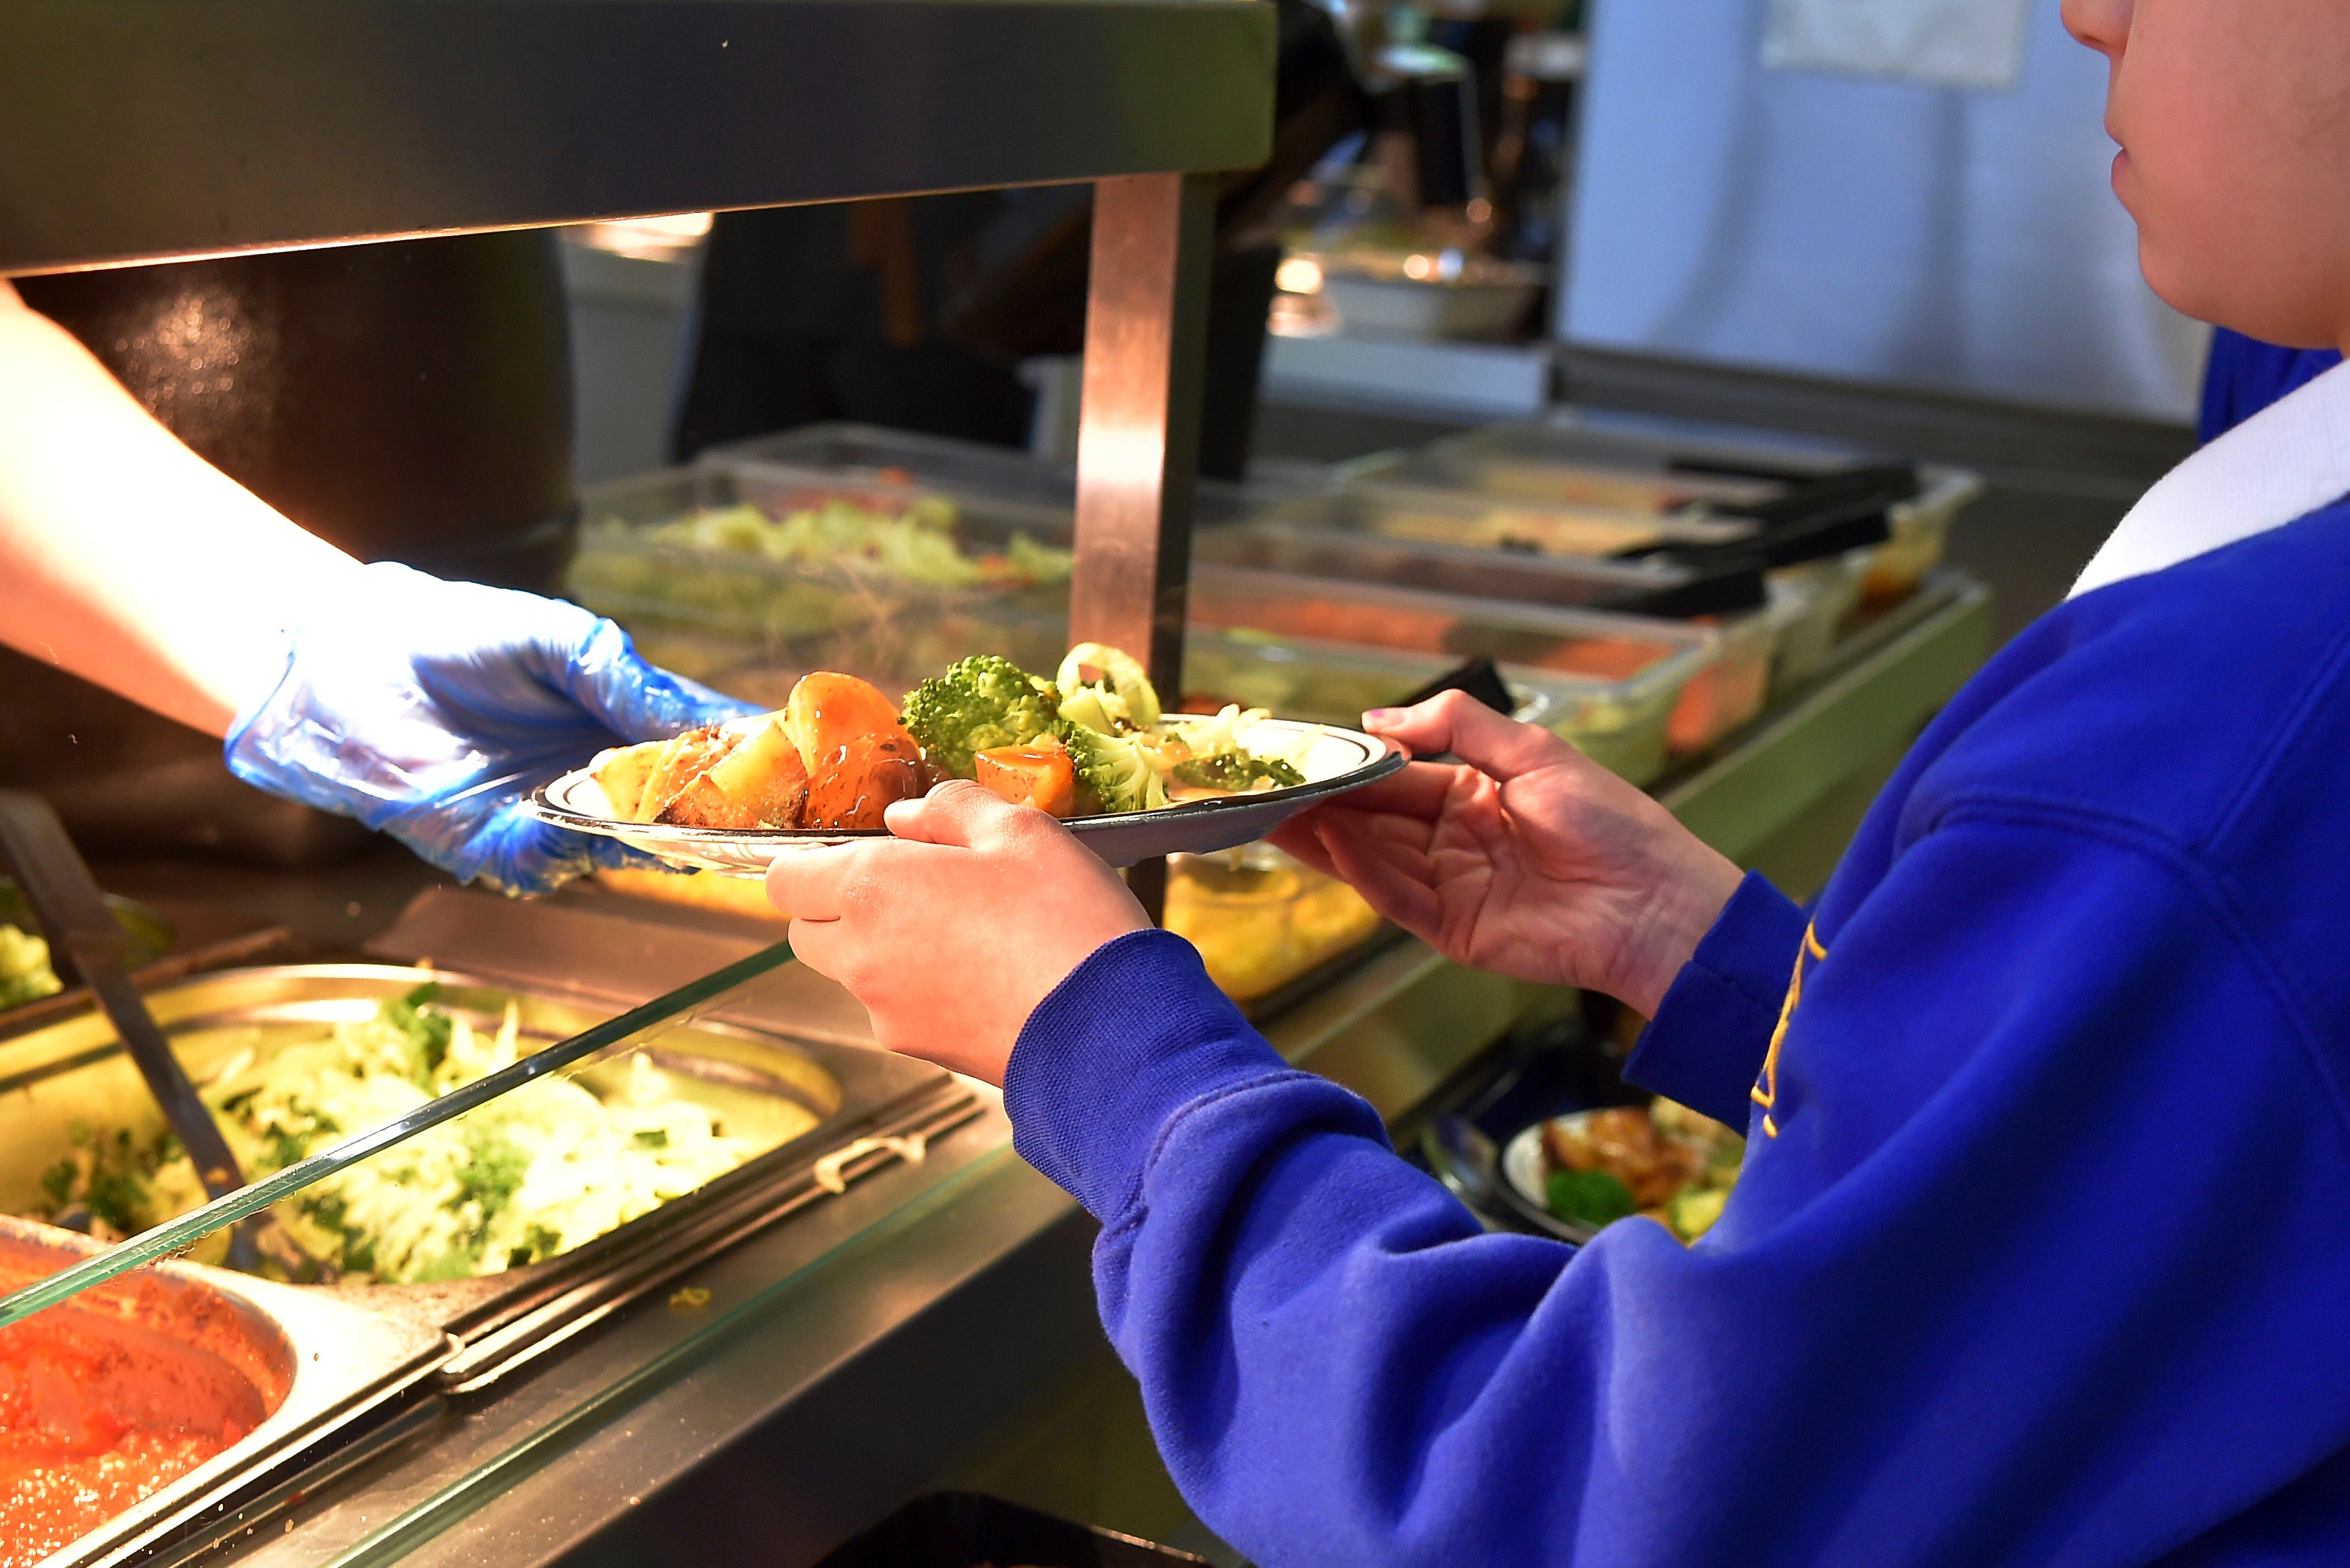 Campaigners are calling for expansion in eligibility for free school meals